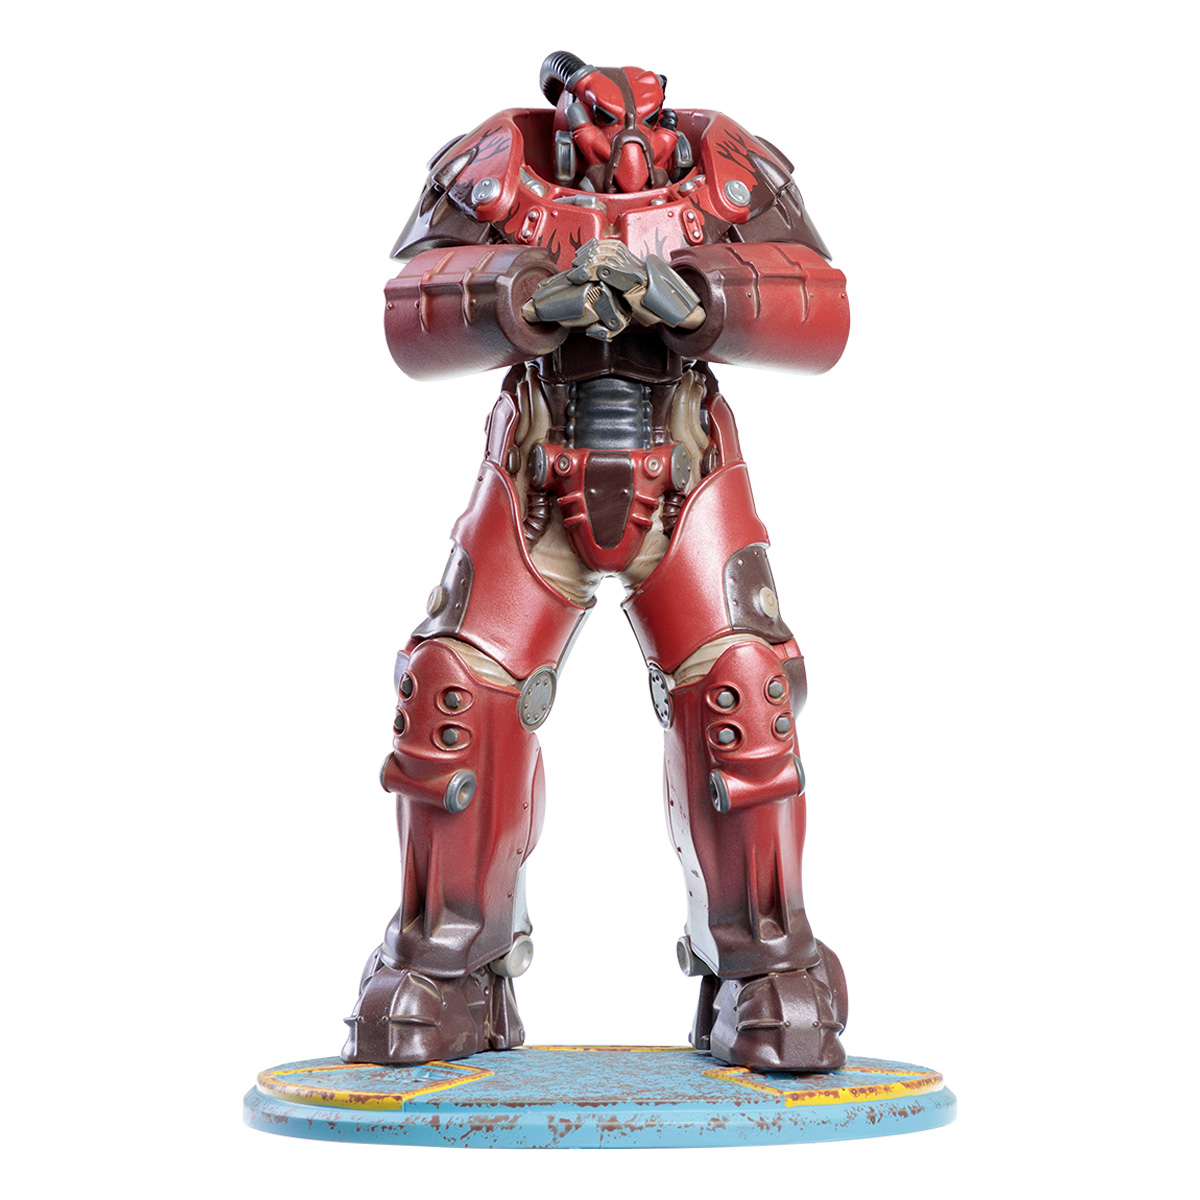 Fallout Power Armor Statue "Hot Rod Flames"